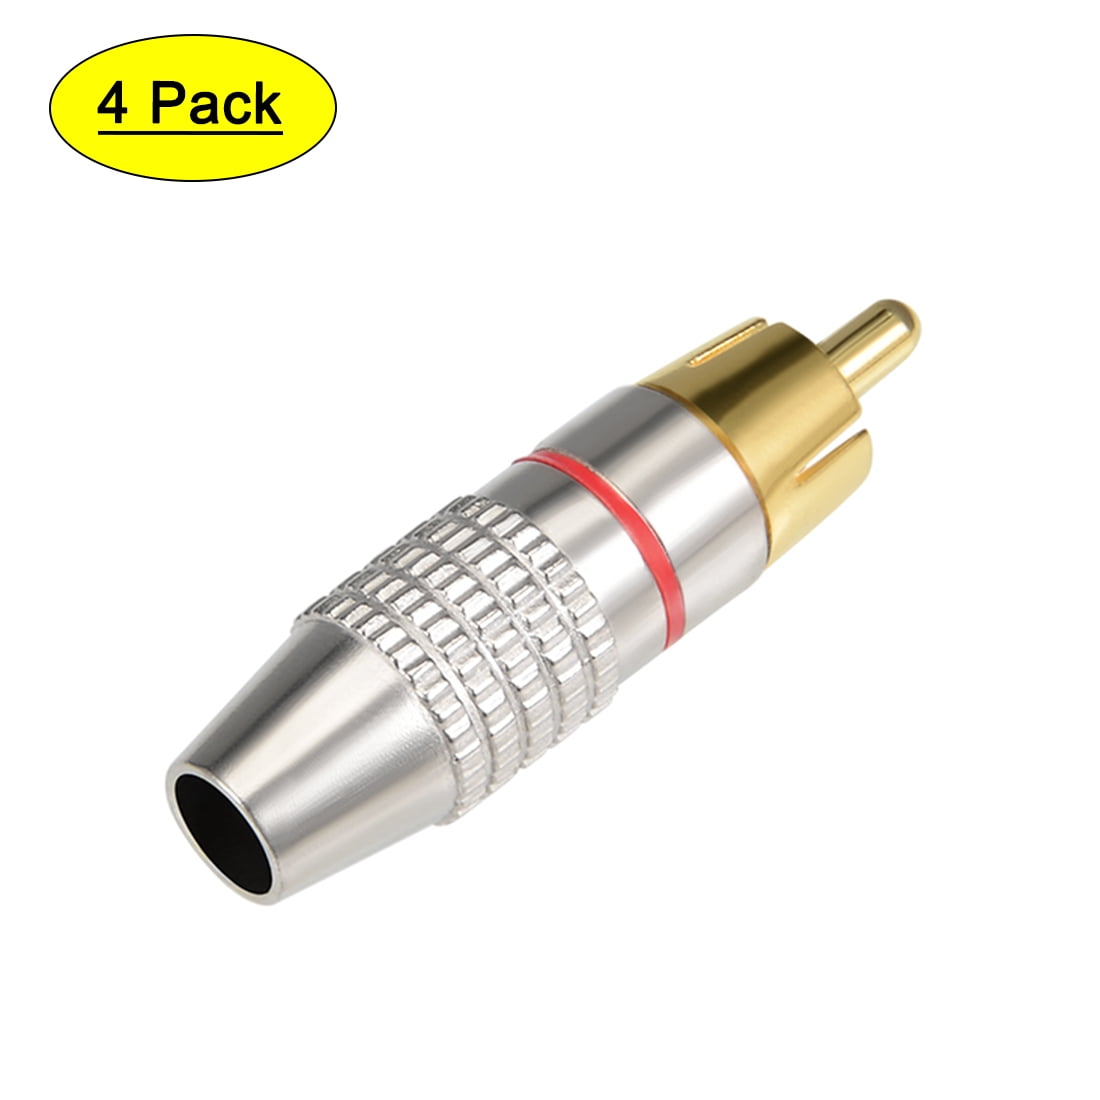 Pro Audio Metal 3.5mm Stereo Jack to 2 RCA Phono Plugs Cable Gold Wholesale UK 